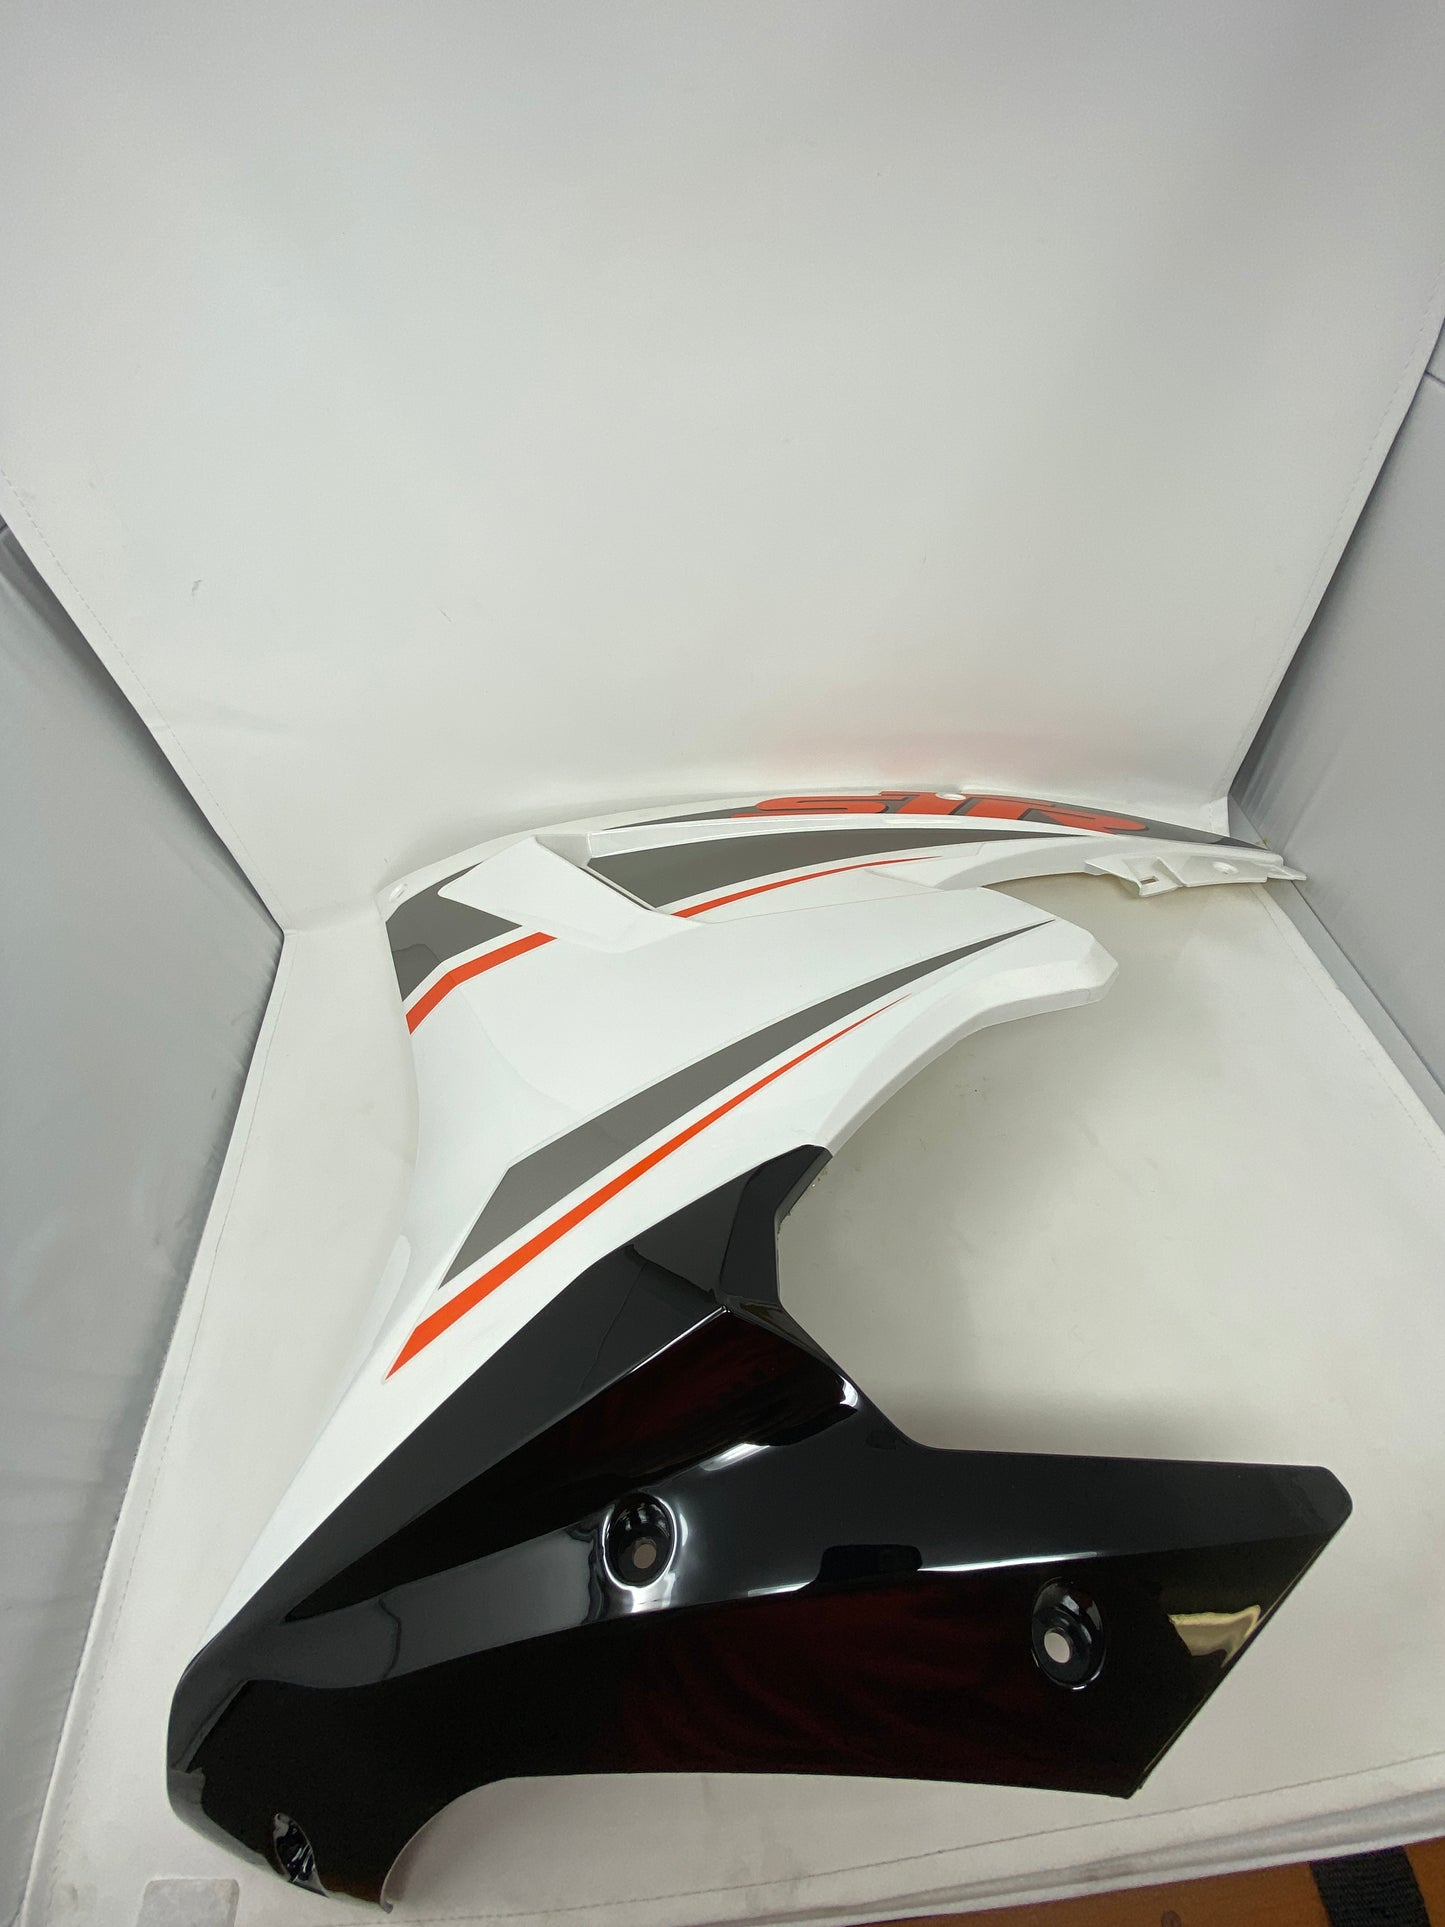 DF250RTS Left main body fairing for sale Dongfang Left middle body fairing for Saale online